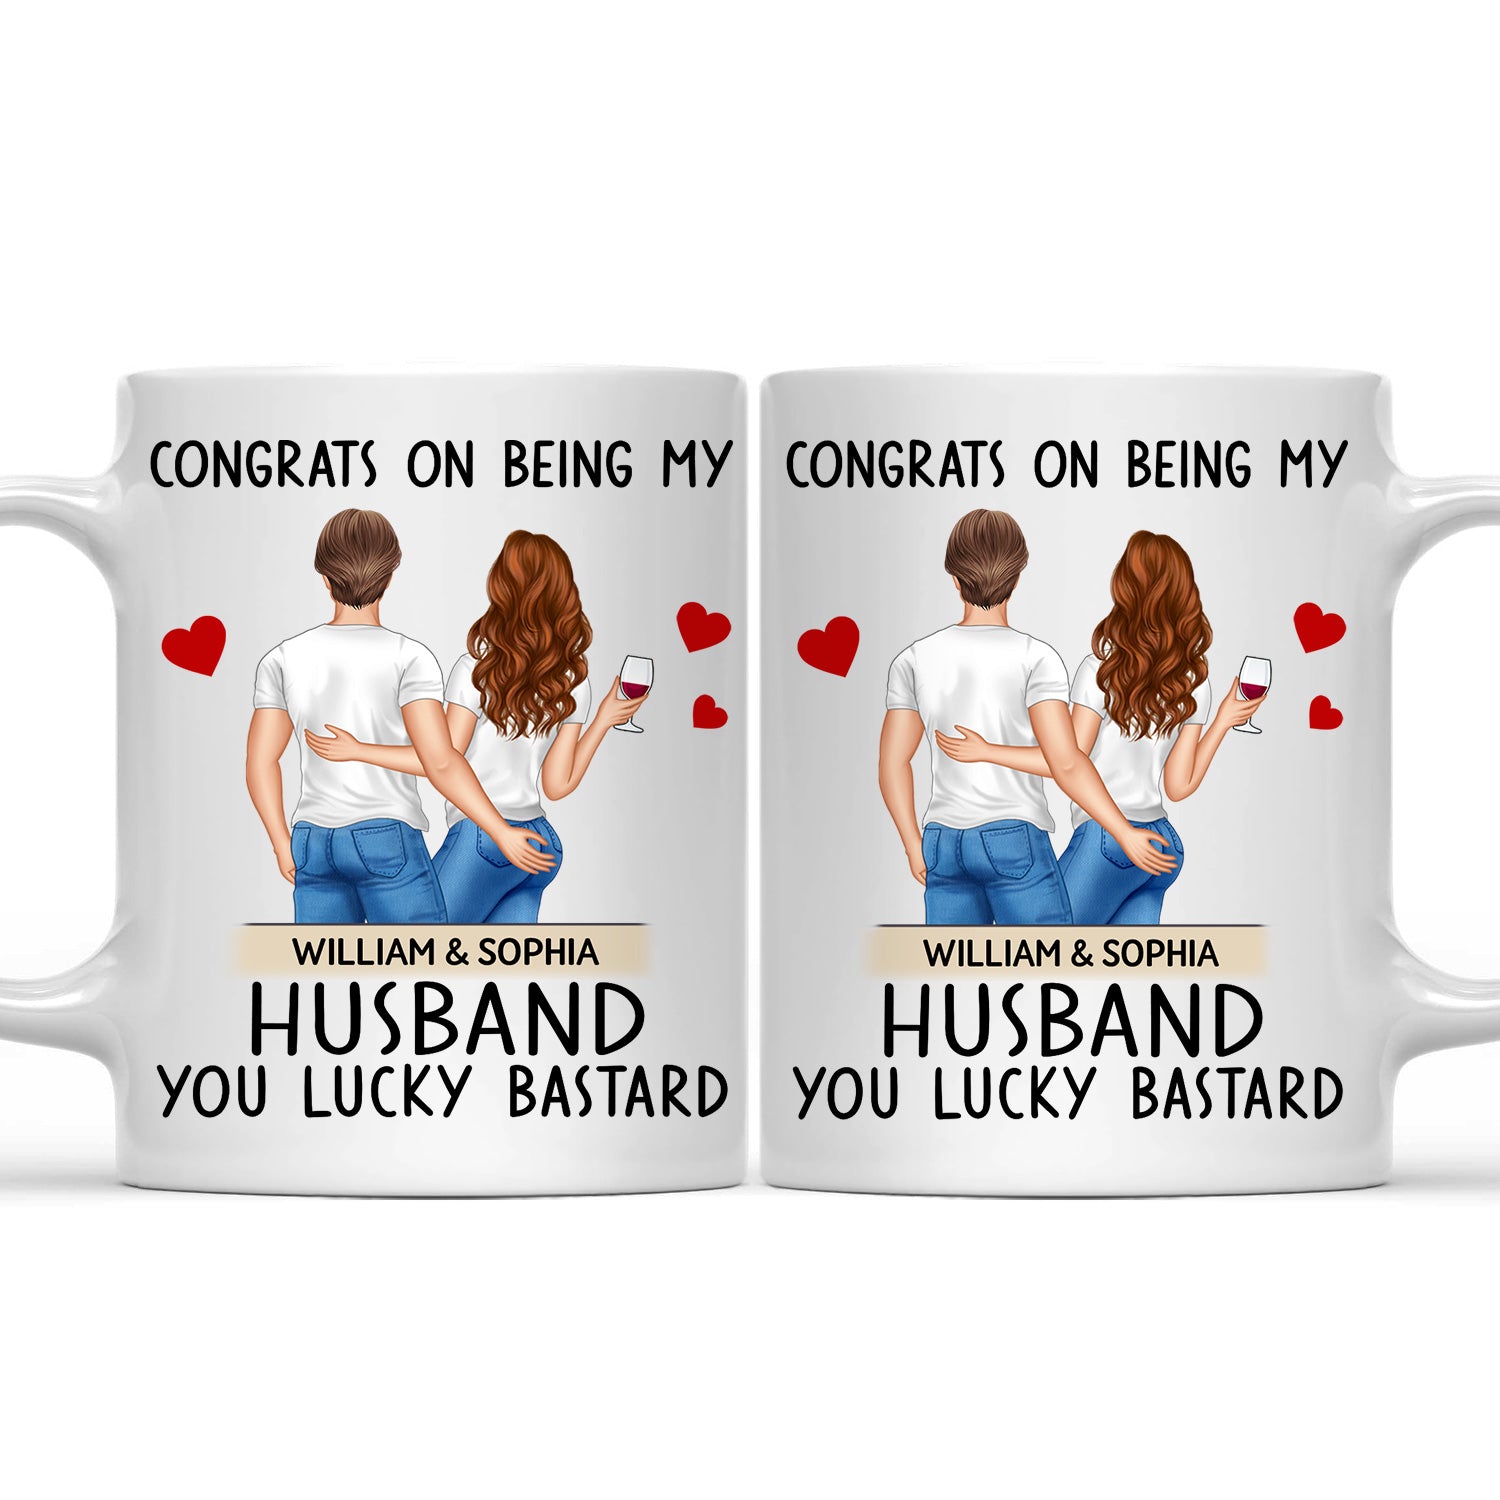 Congrats On Being My Husband Backside - Anniversary, Vacation, Funny Gift For Couples, Family - Personalized Mug